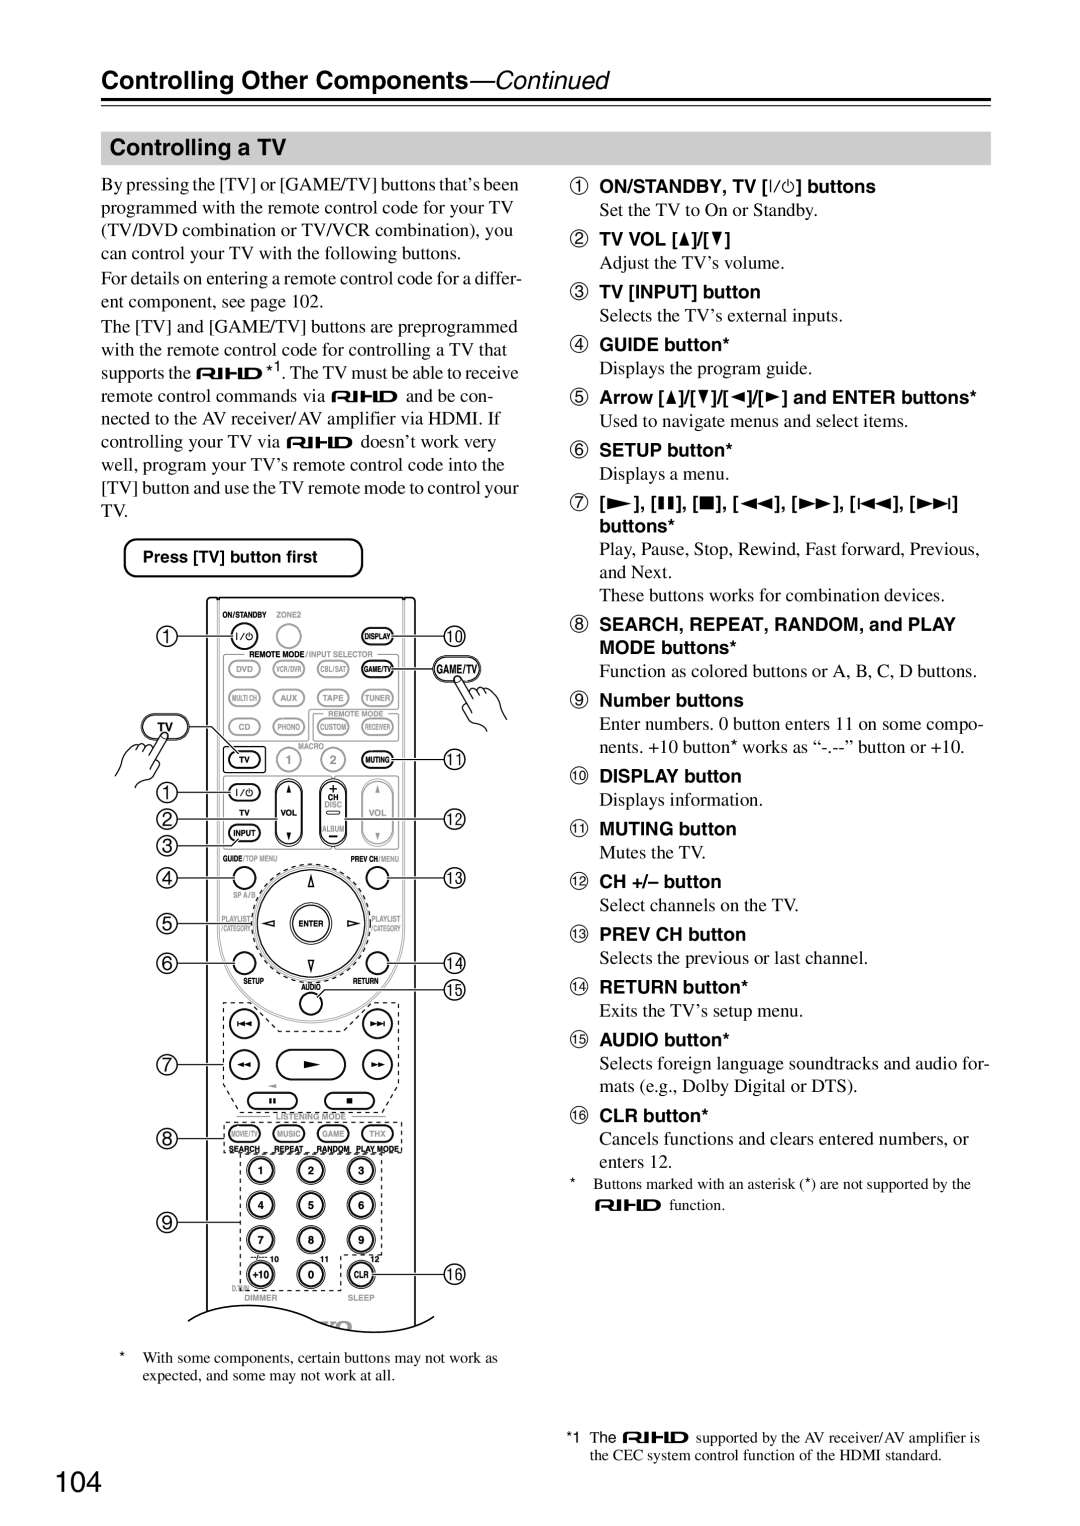 Onkyo TX-SA706 instruction manual Controlling a TV, 78 9 bq, Controlling Other Components—Continued 